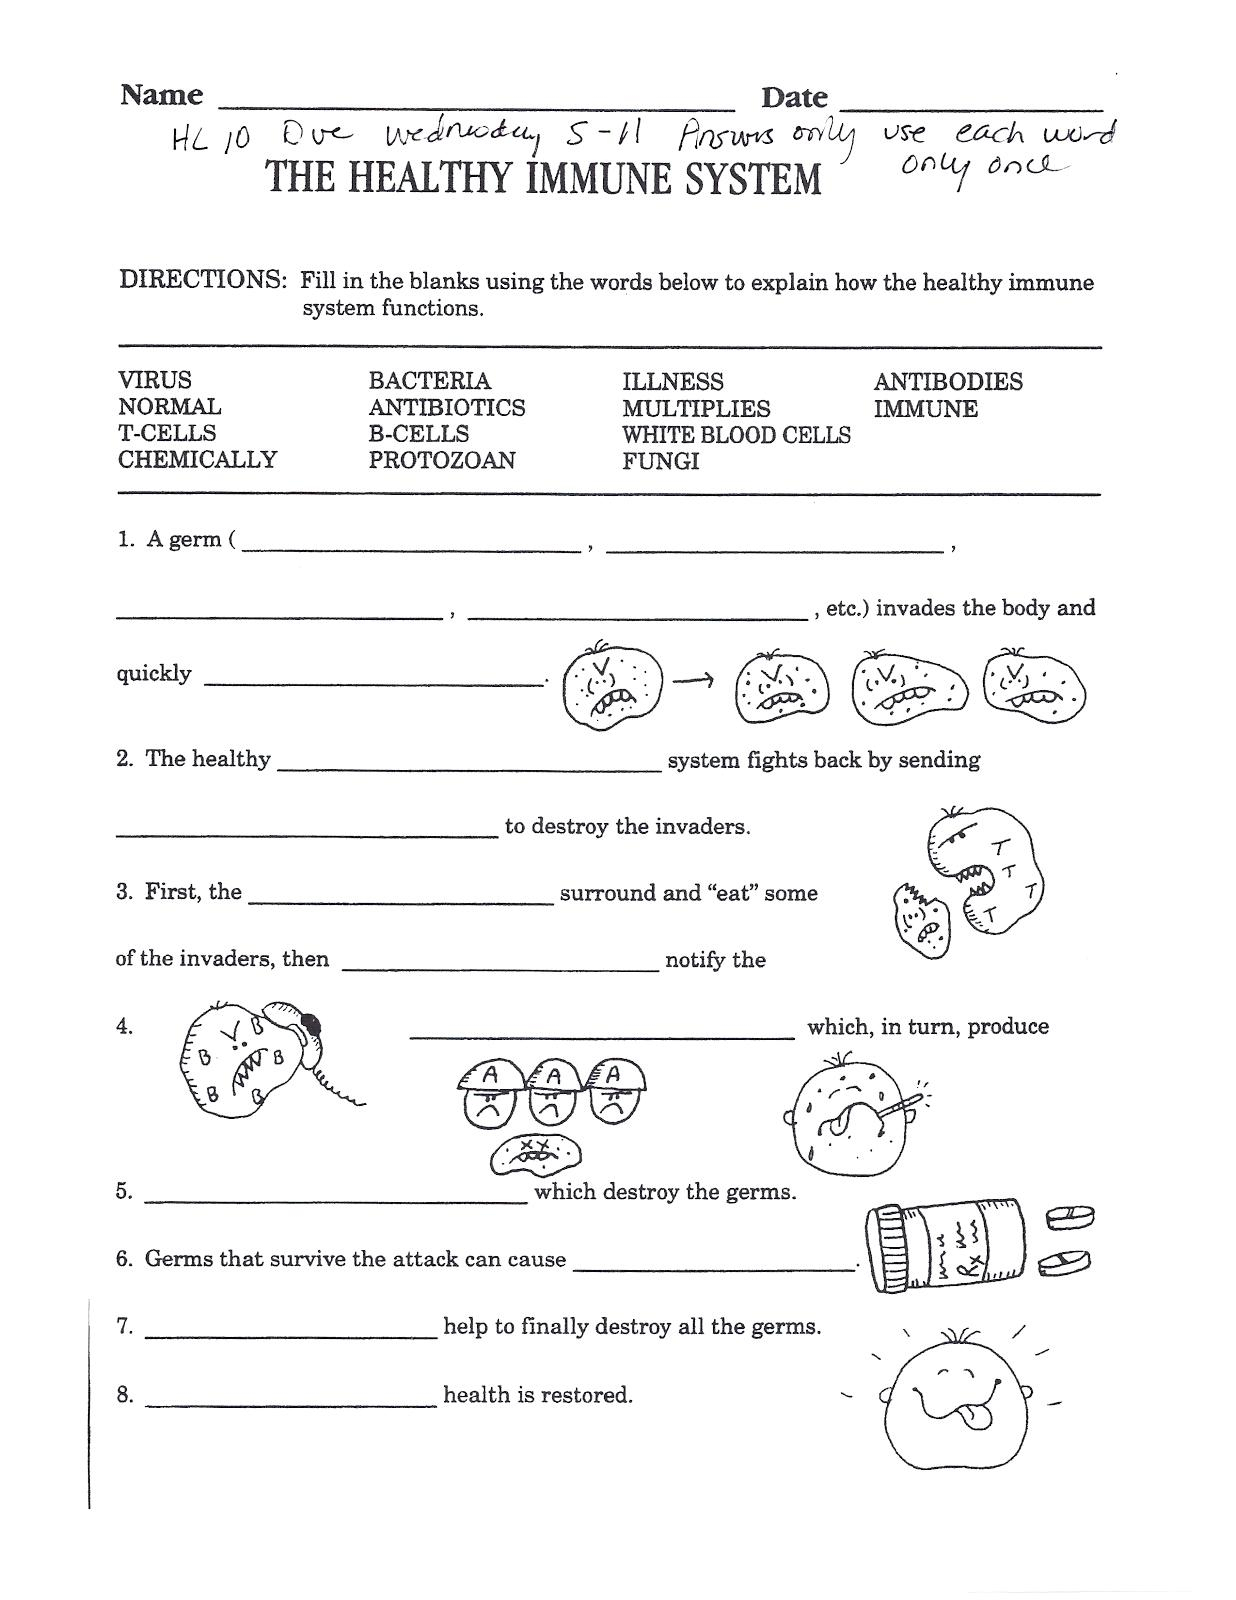 Free Printable Health Worksheets For Middle School Lexia s Blog